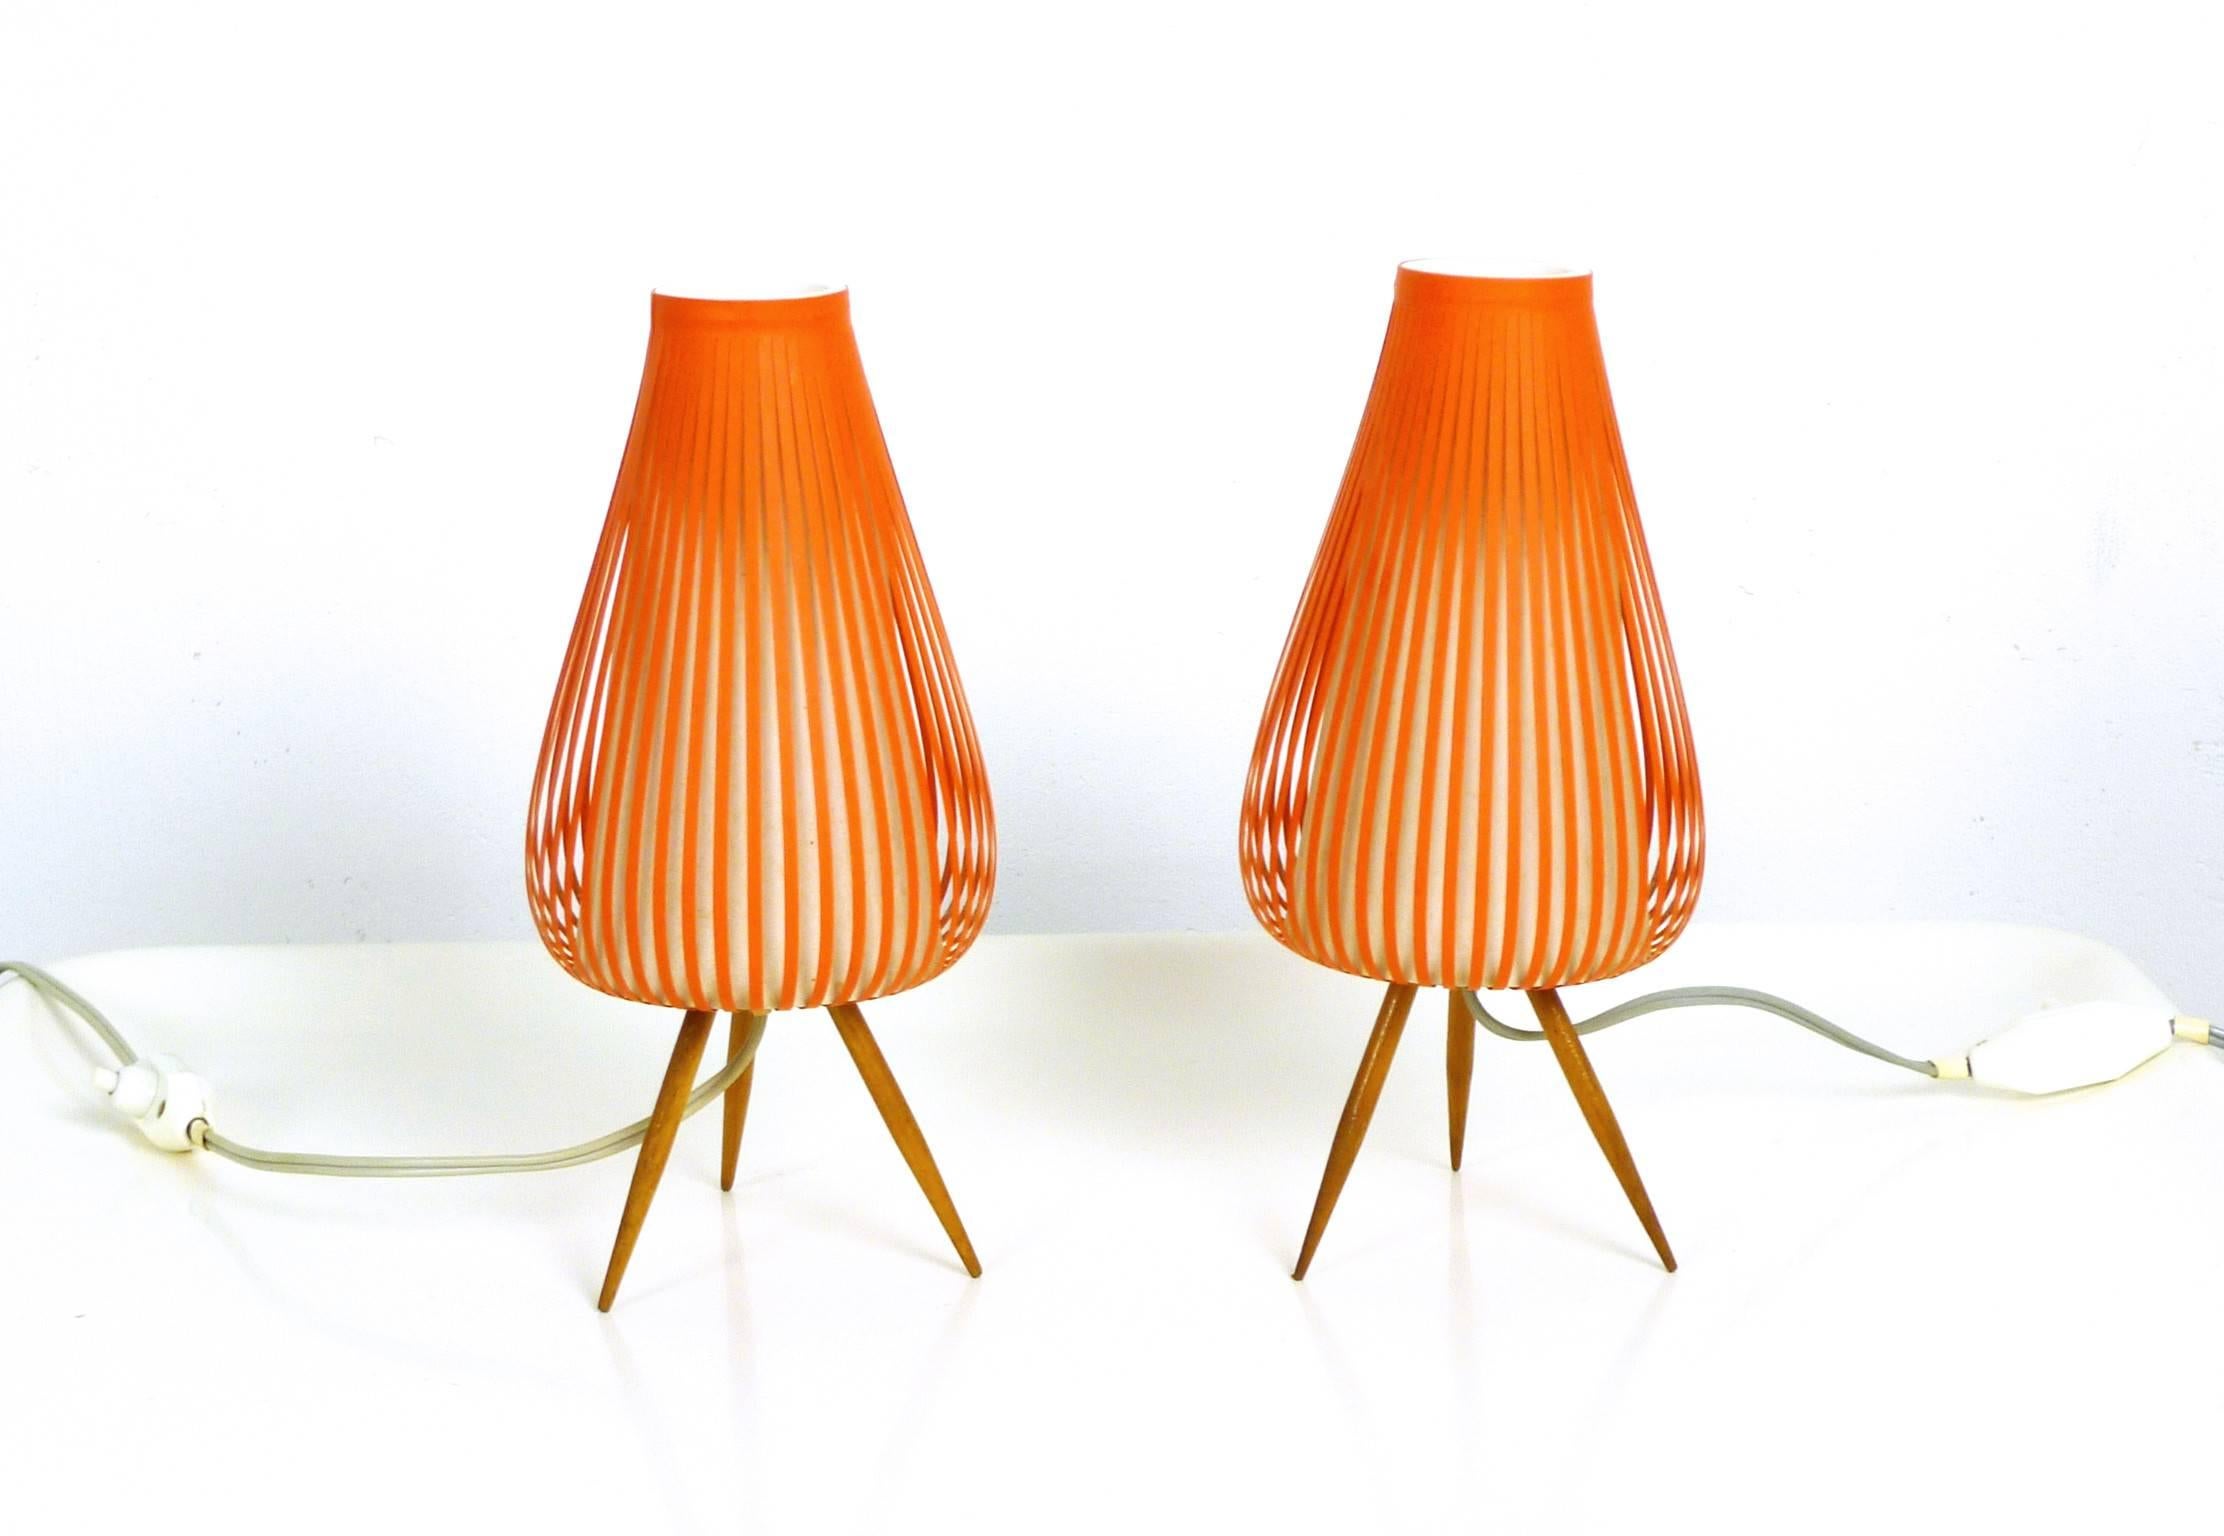 This pair of table lamps for nightstands was made in Germany. The tripod bases are made of wood and the orange striped shades generate an interesting Silhouette of light and shadow. Both lamps are in a very good original condition.